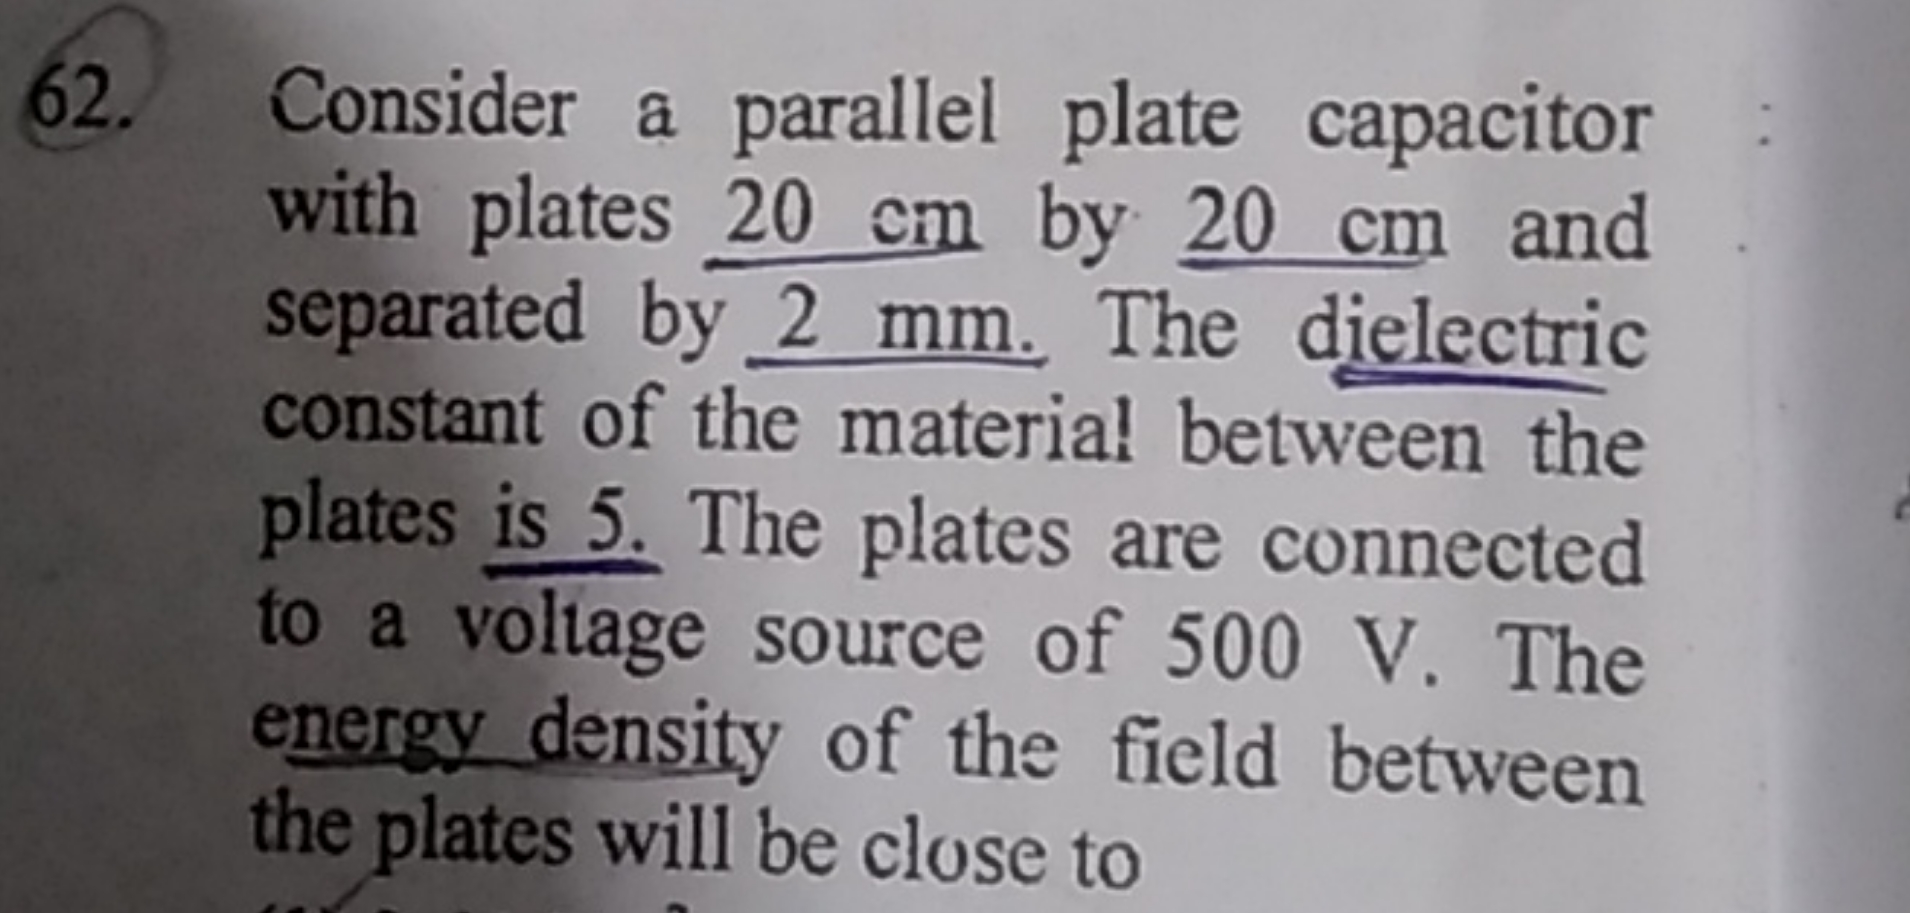 62. Consider a parallel plate capacitor with plates 20 cm by 20 cm and